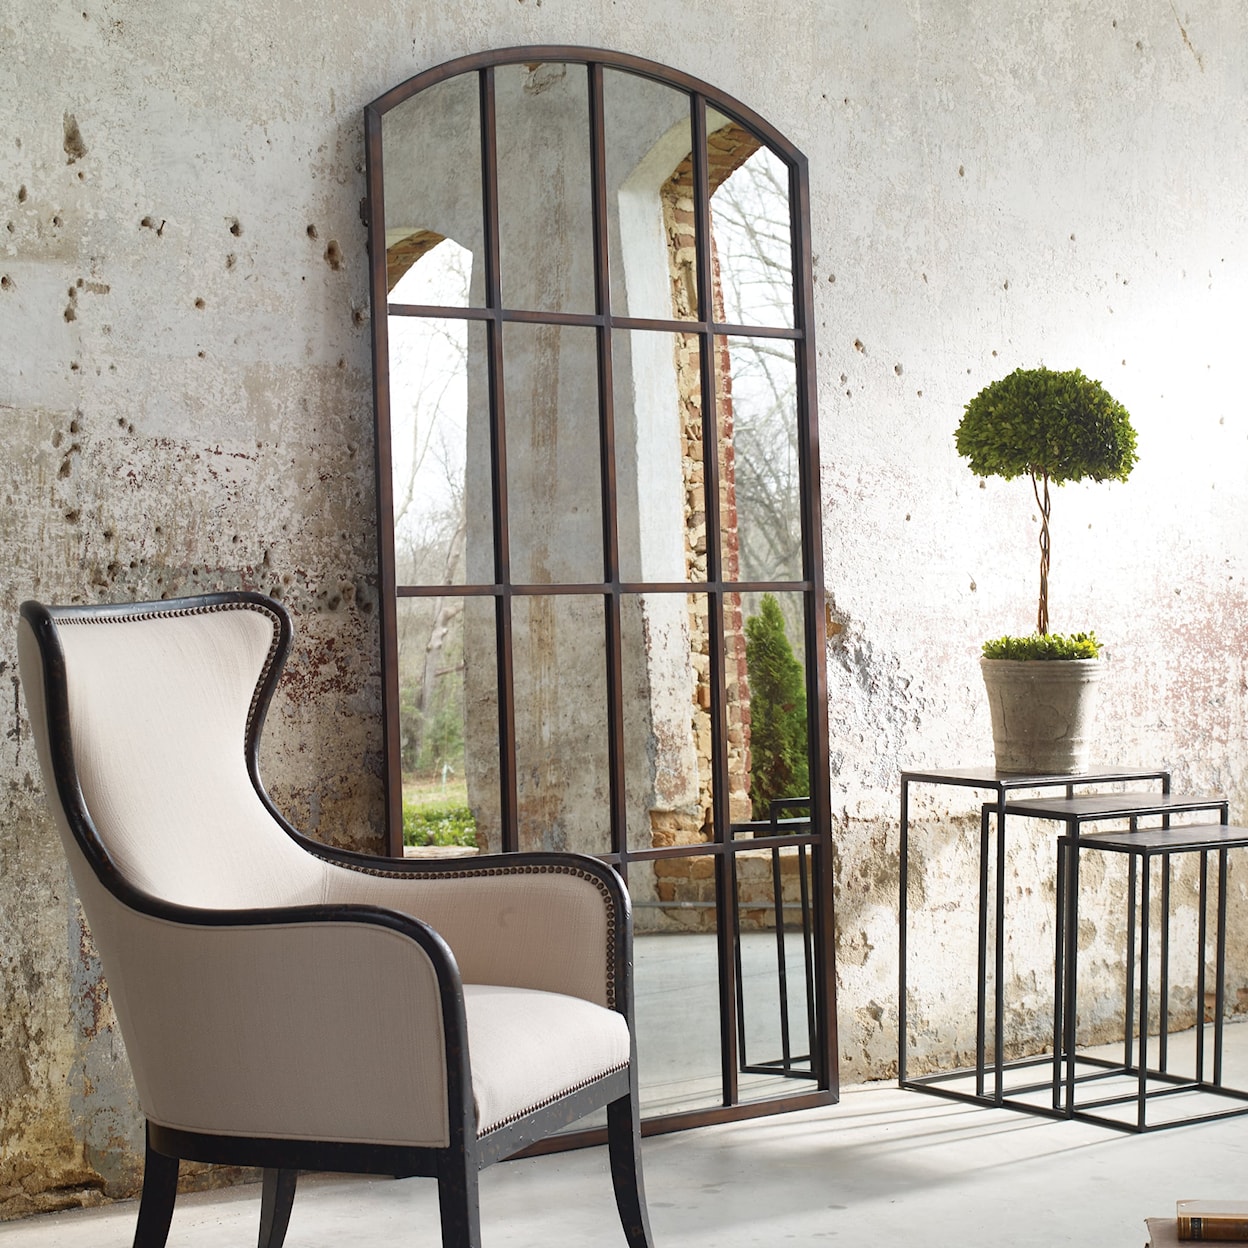 Uttermost Arched Mirrors Amiel Large Arch